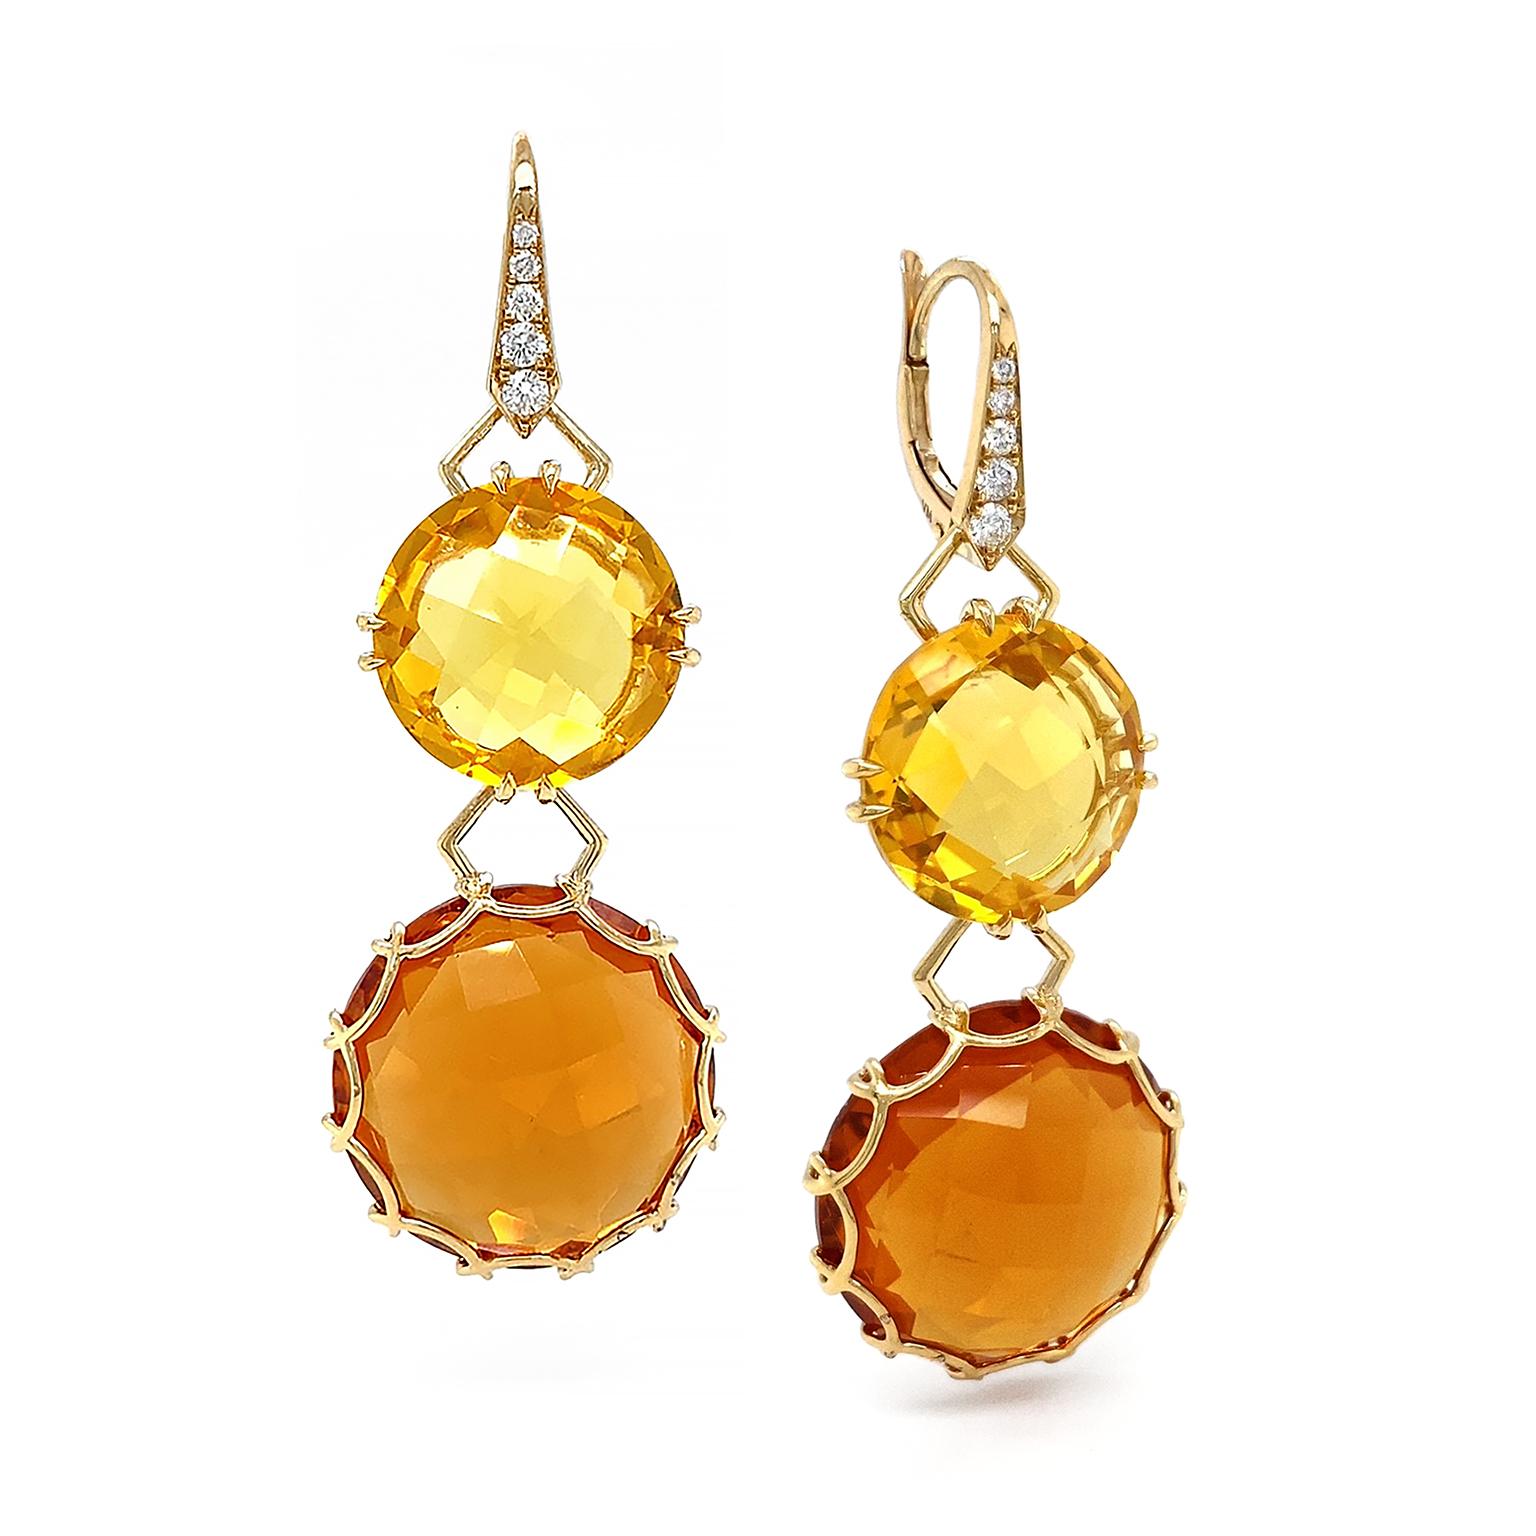 The assortment of citrine is presented in these earrings. Round brilliant cut diamonds are set in the 18k yellow gold lever backs. Angular bars lead to a drop of a round checkerboard cut of citrine set in prongs and another set of bars connects to a